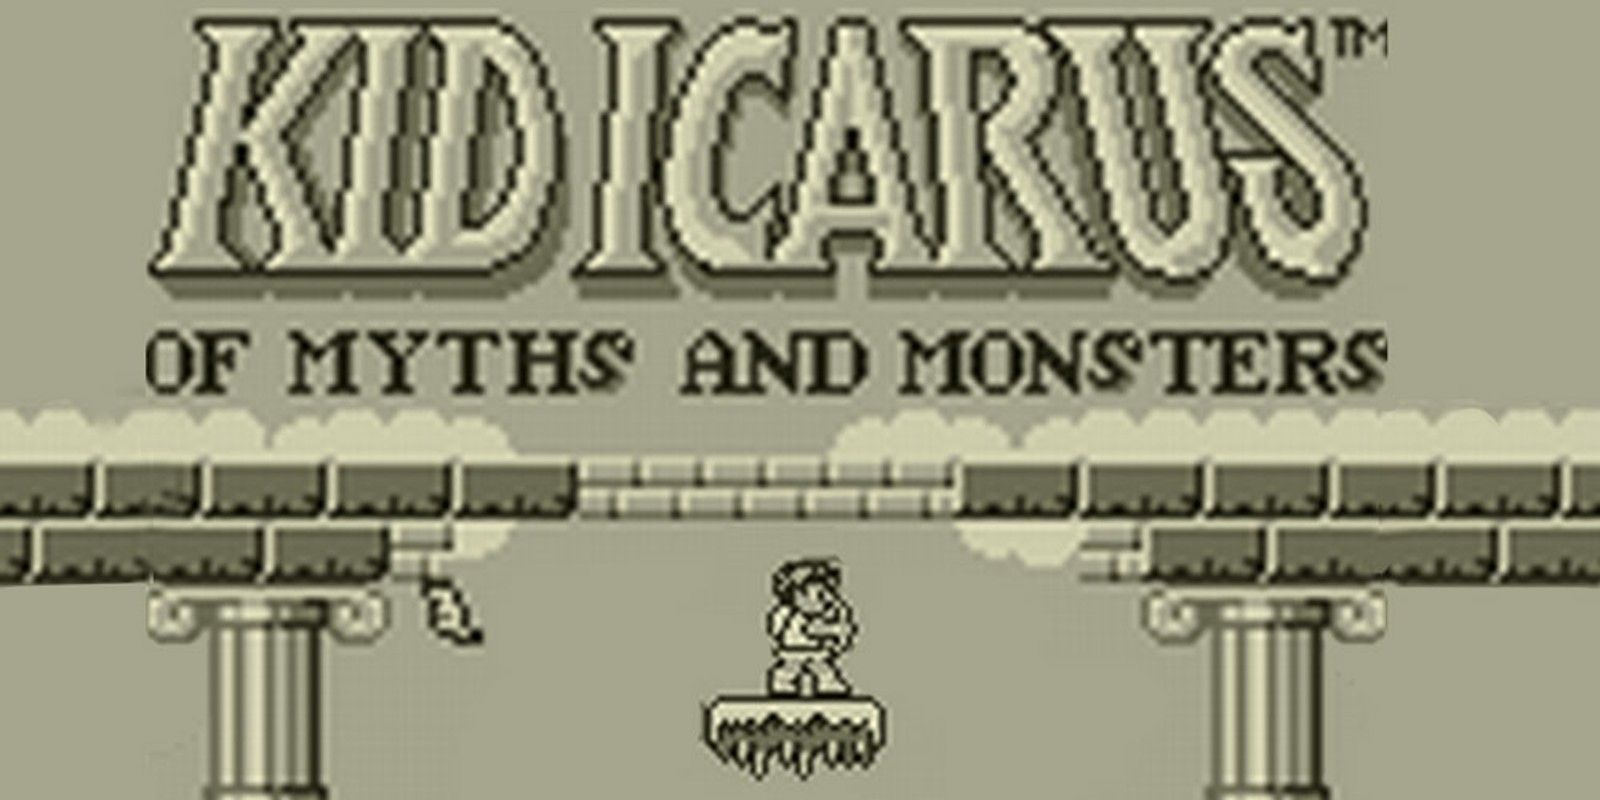 kid-icarus-of-myths-and-monsters